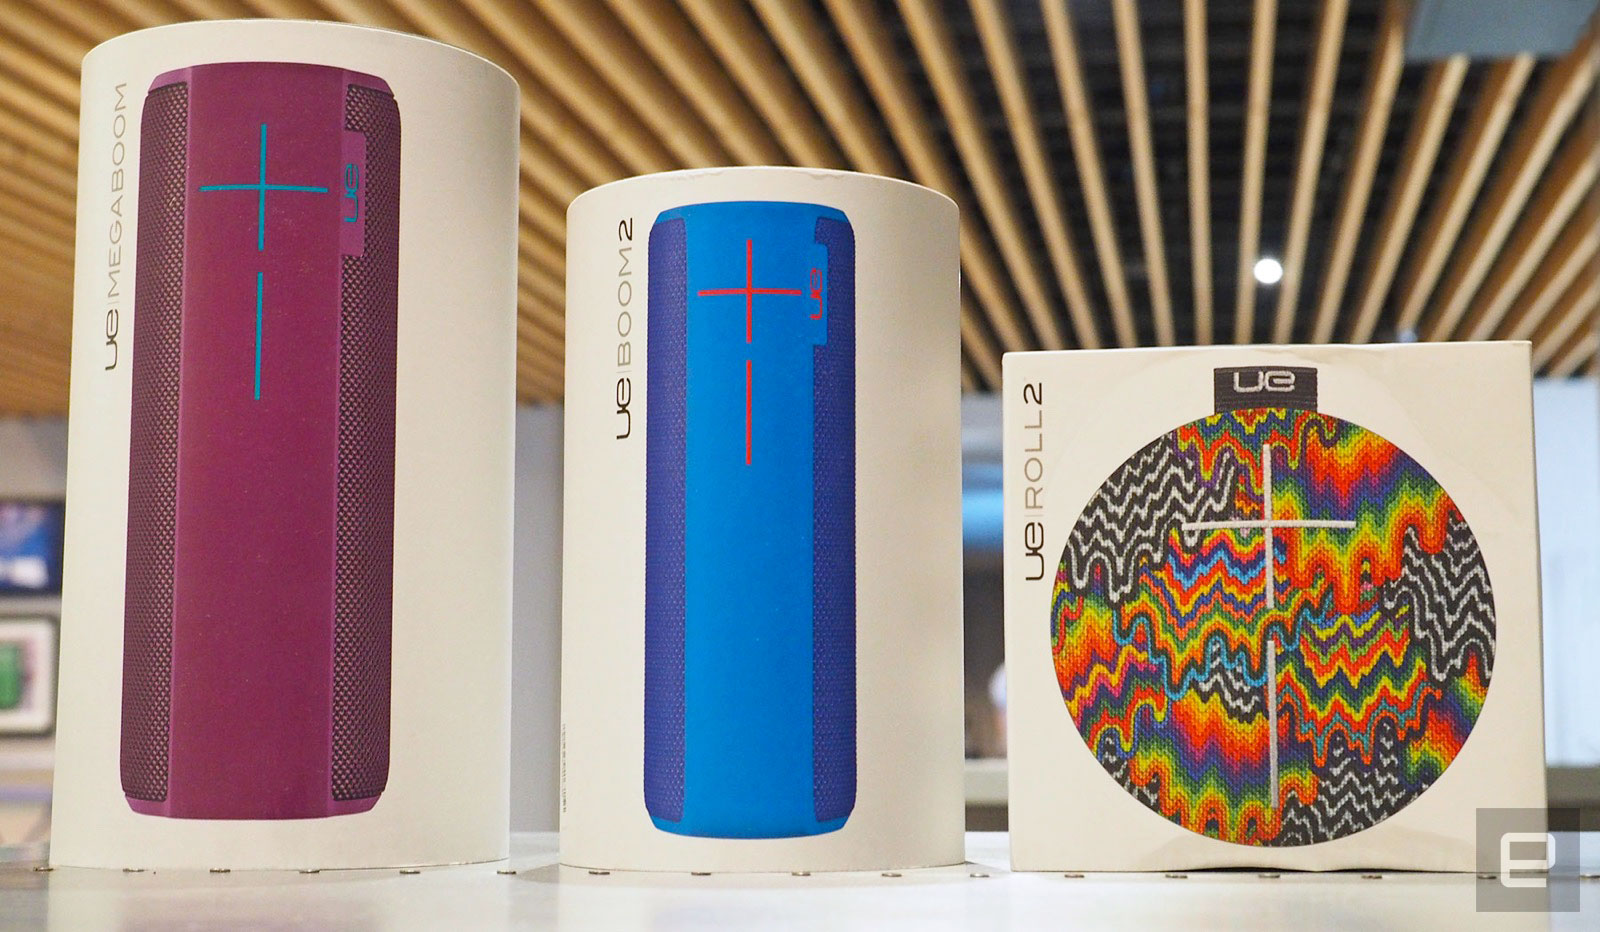 Engadget giveaway: Win a complete set of Ultimate Ears Bluetooth speakers!